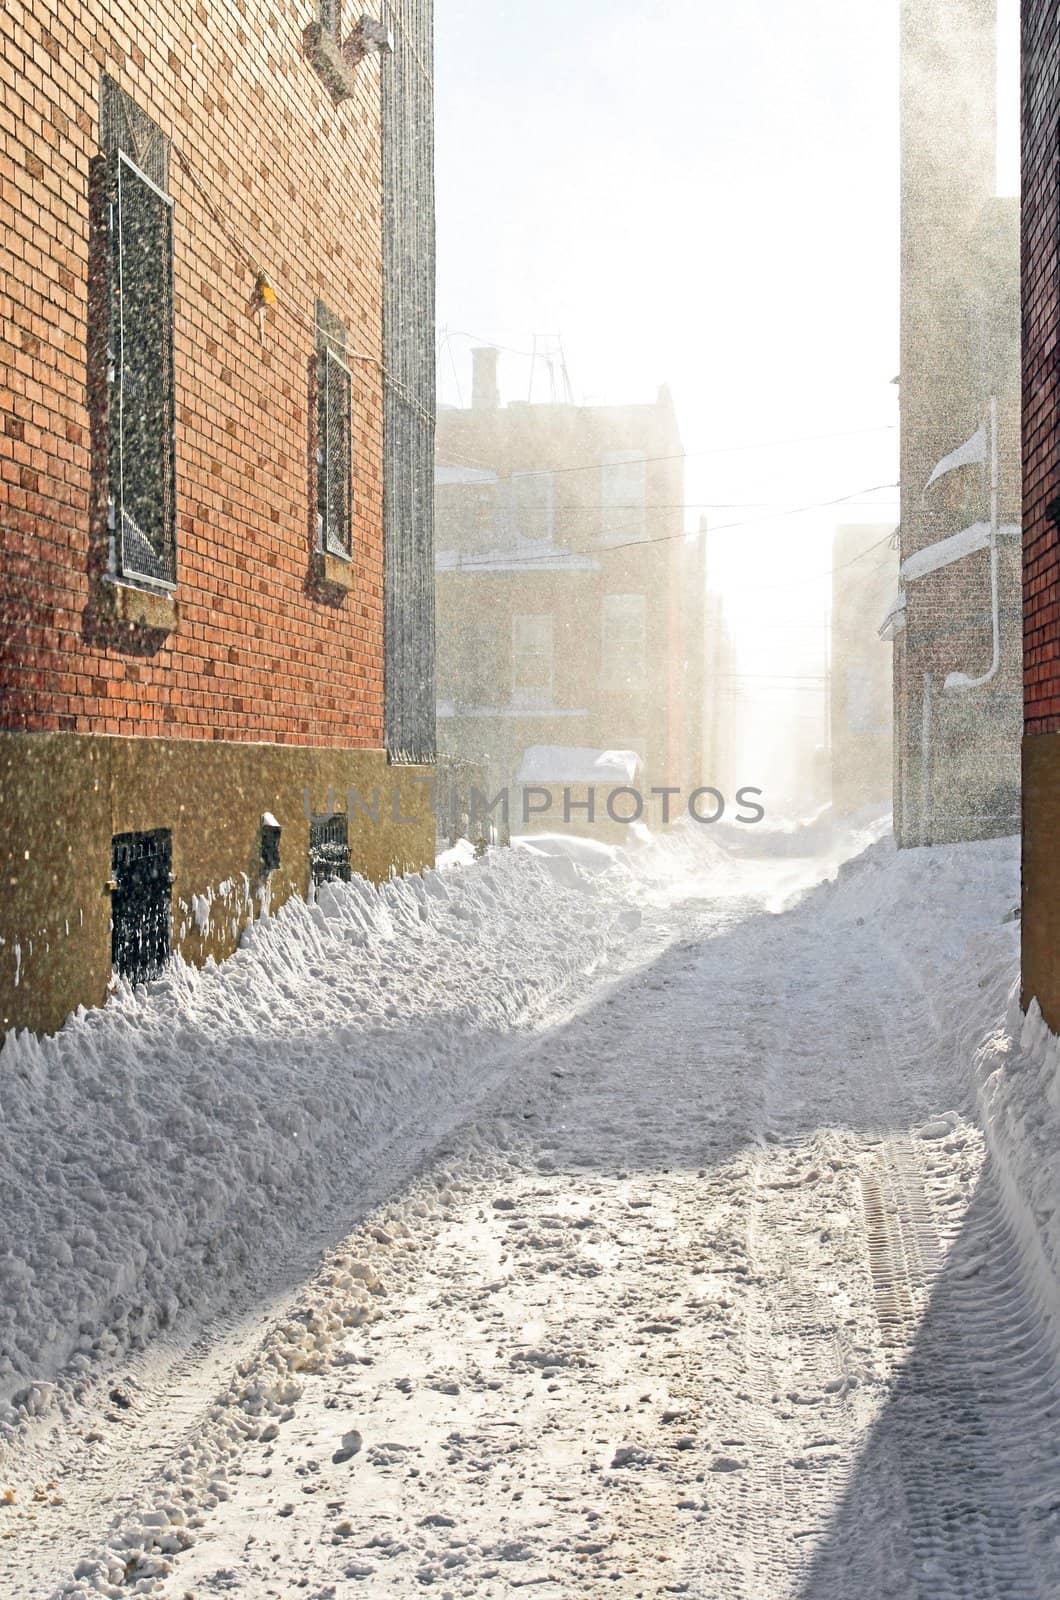 Snowstorm in the sunlight. Urban street covered by snow.